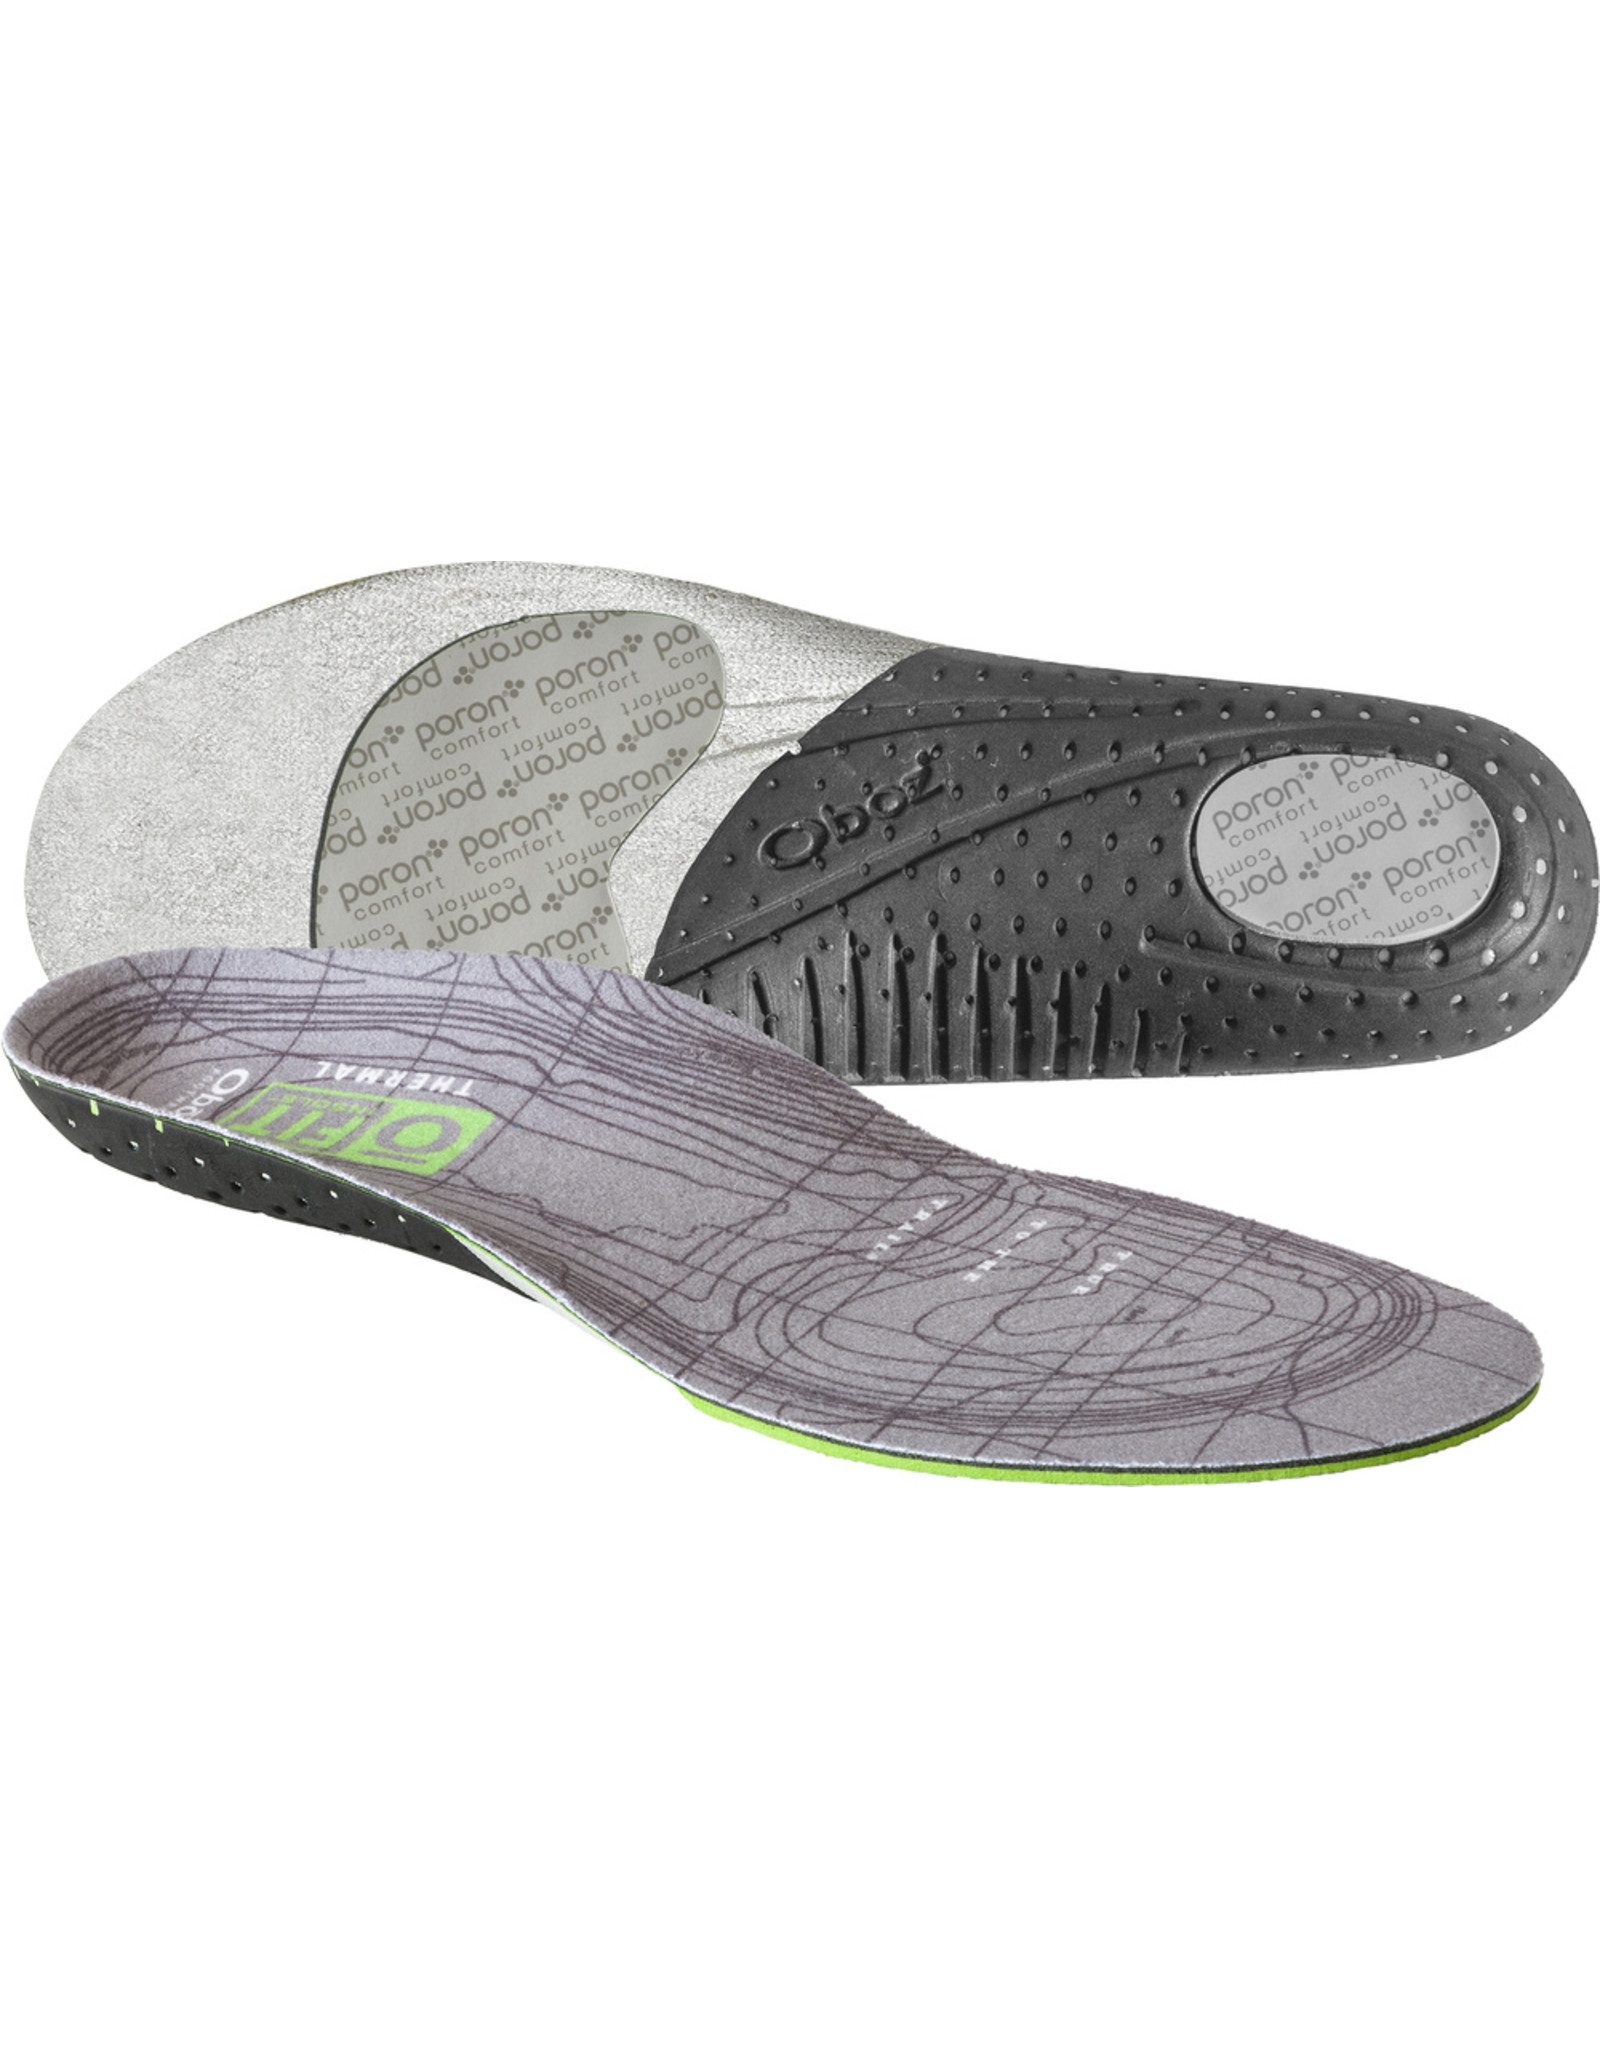 OBOZ O FIT INSOLE PLUS THERMAL